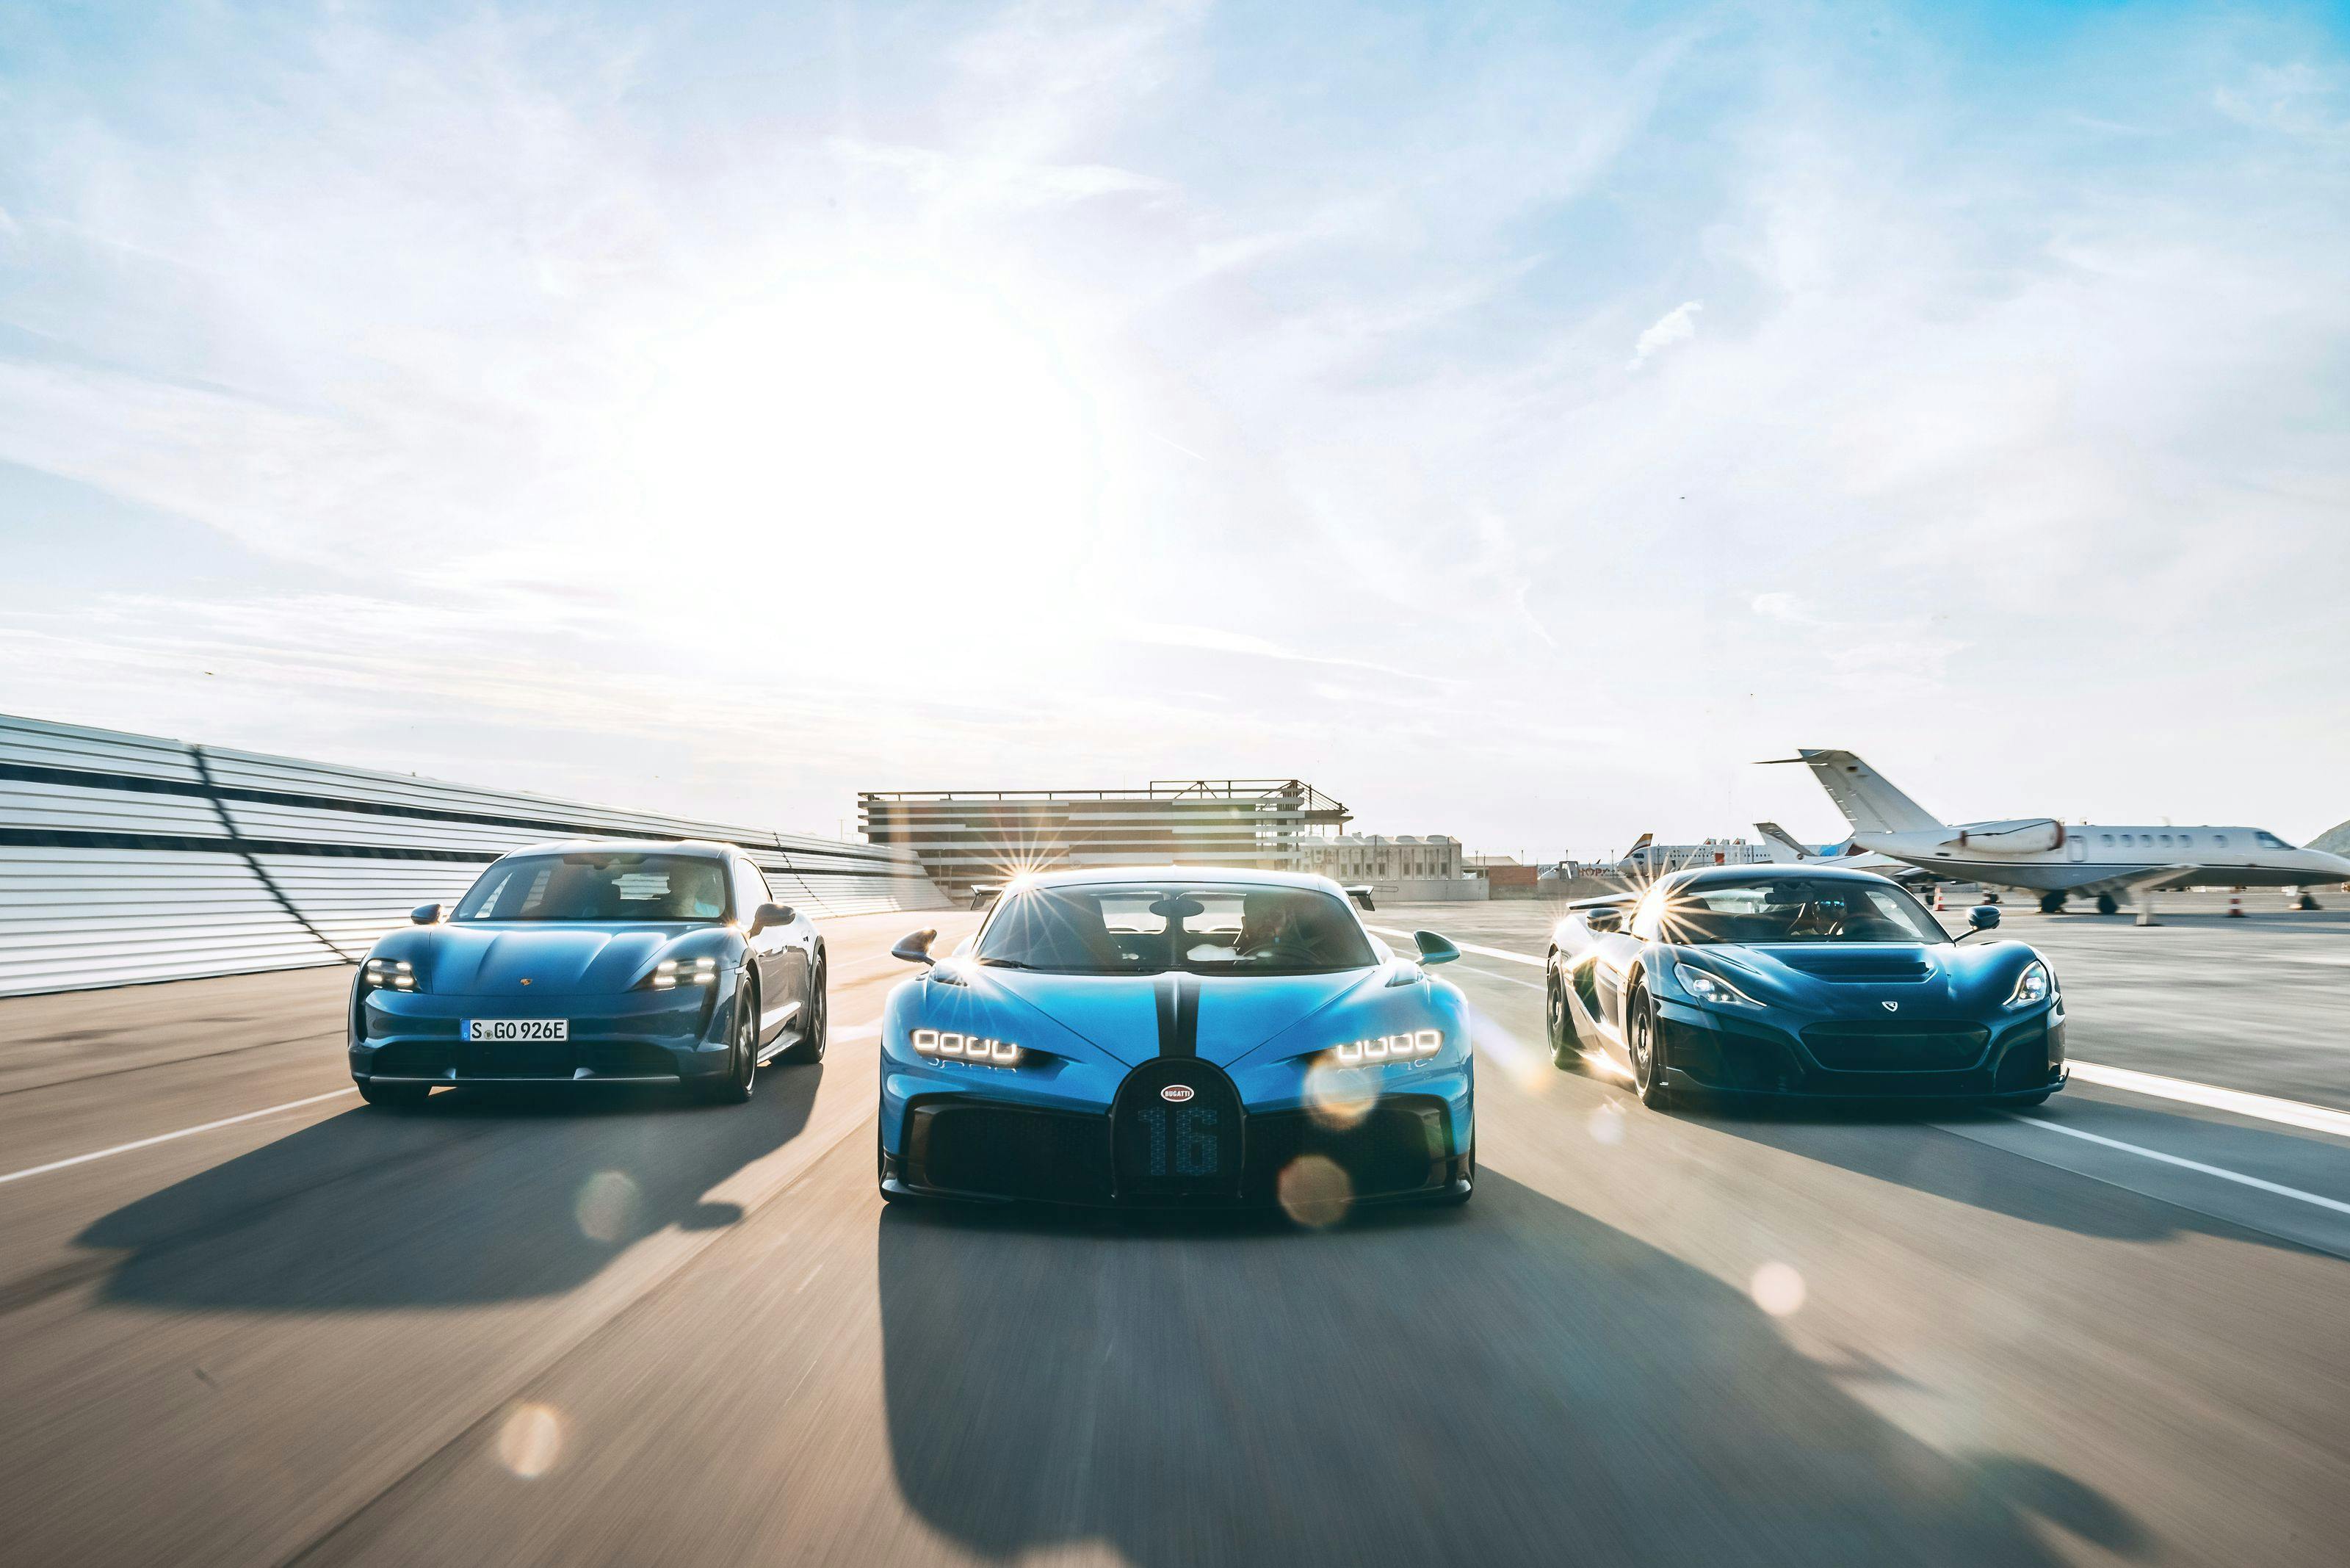 Bugatti to form part of a new joint company